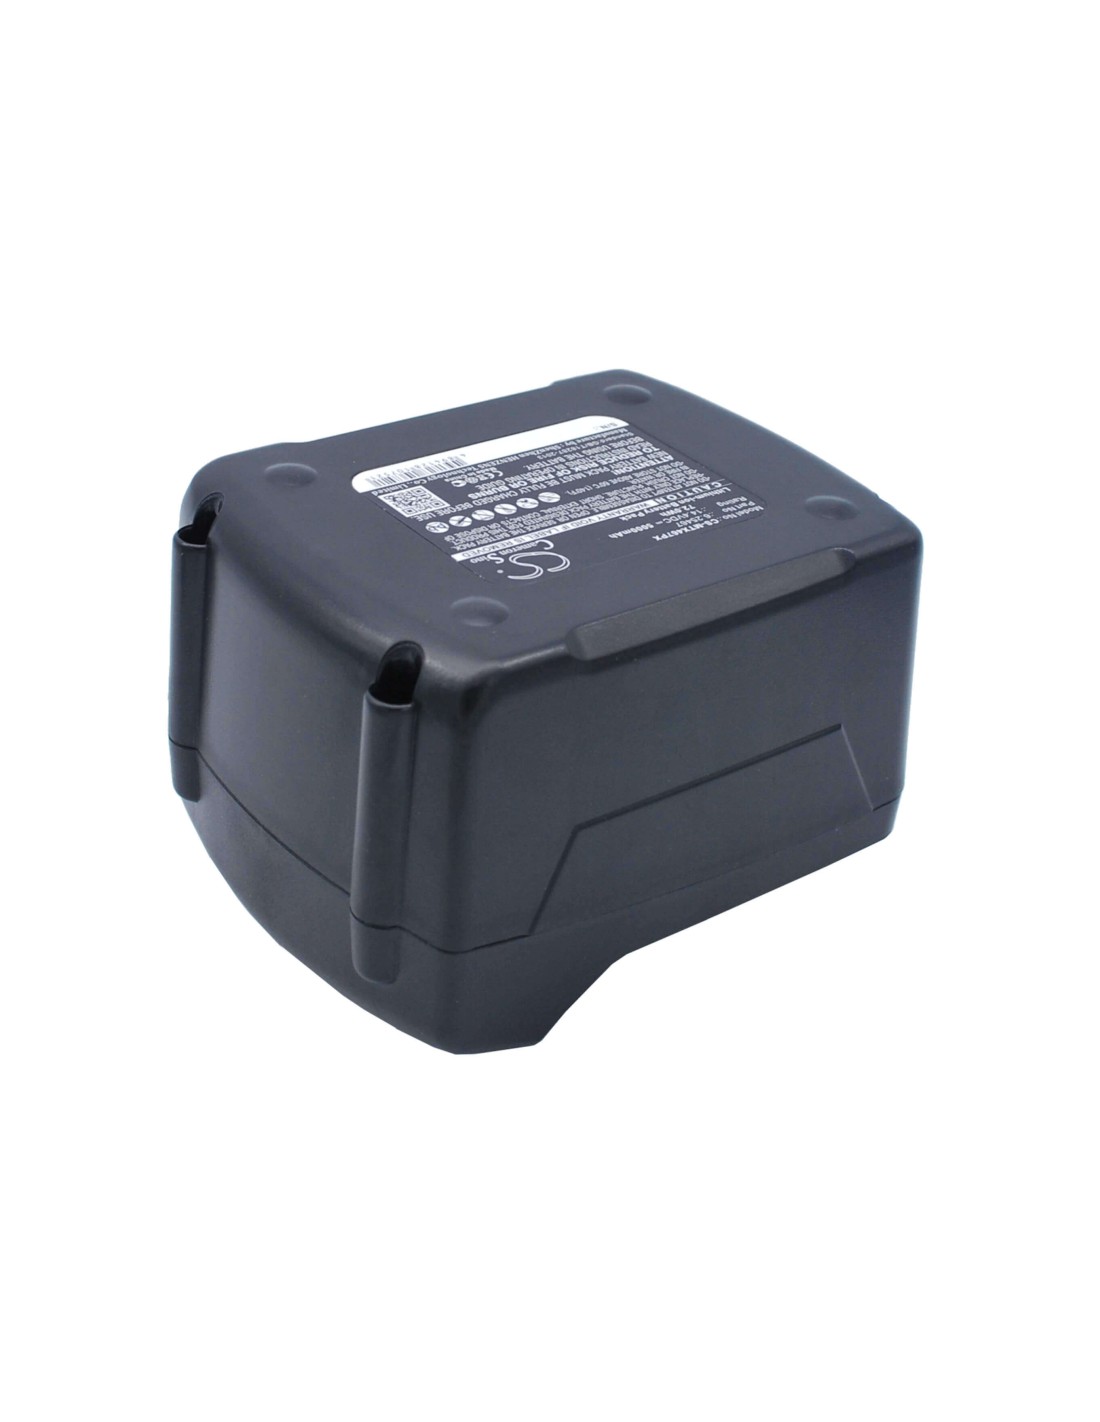 Battery for Metabo Bs 14.4 6.02105.50, Bs 14.4 6.02105.51, Bs 14.4 Lt Compact 6.02137.55 14.4V, 5000mAh - 72.00Wh